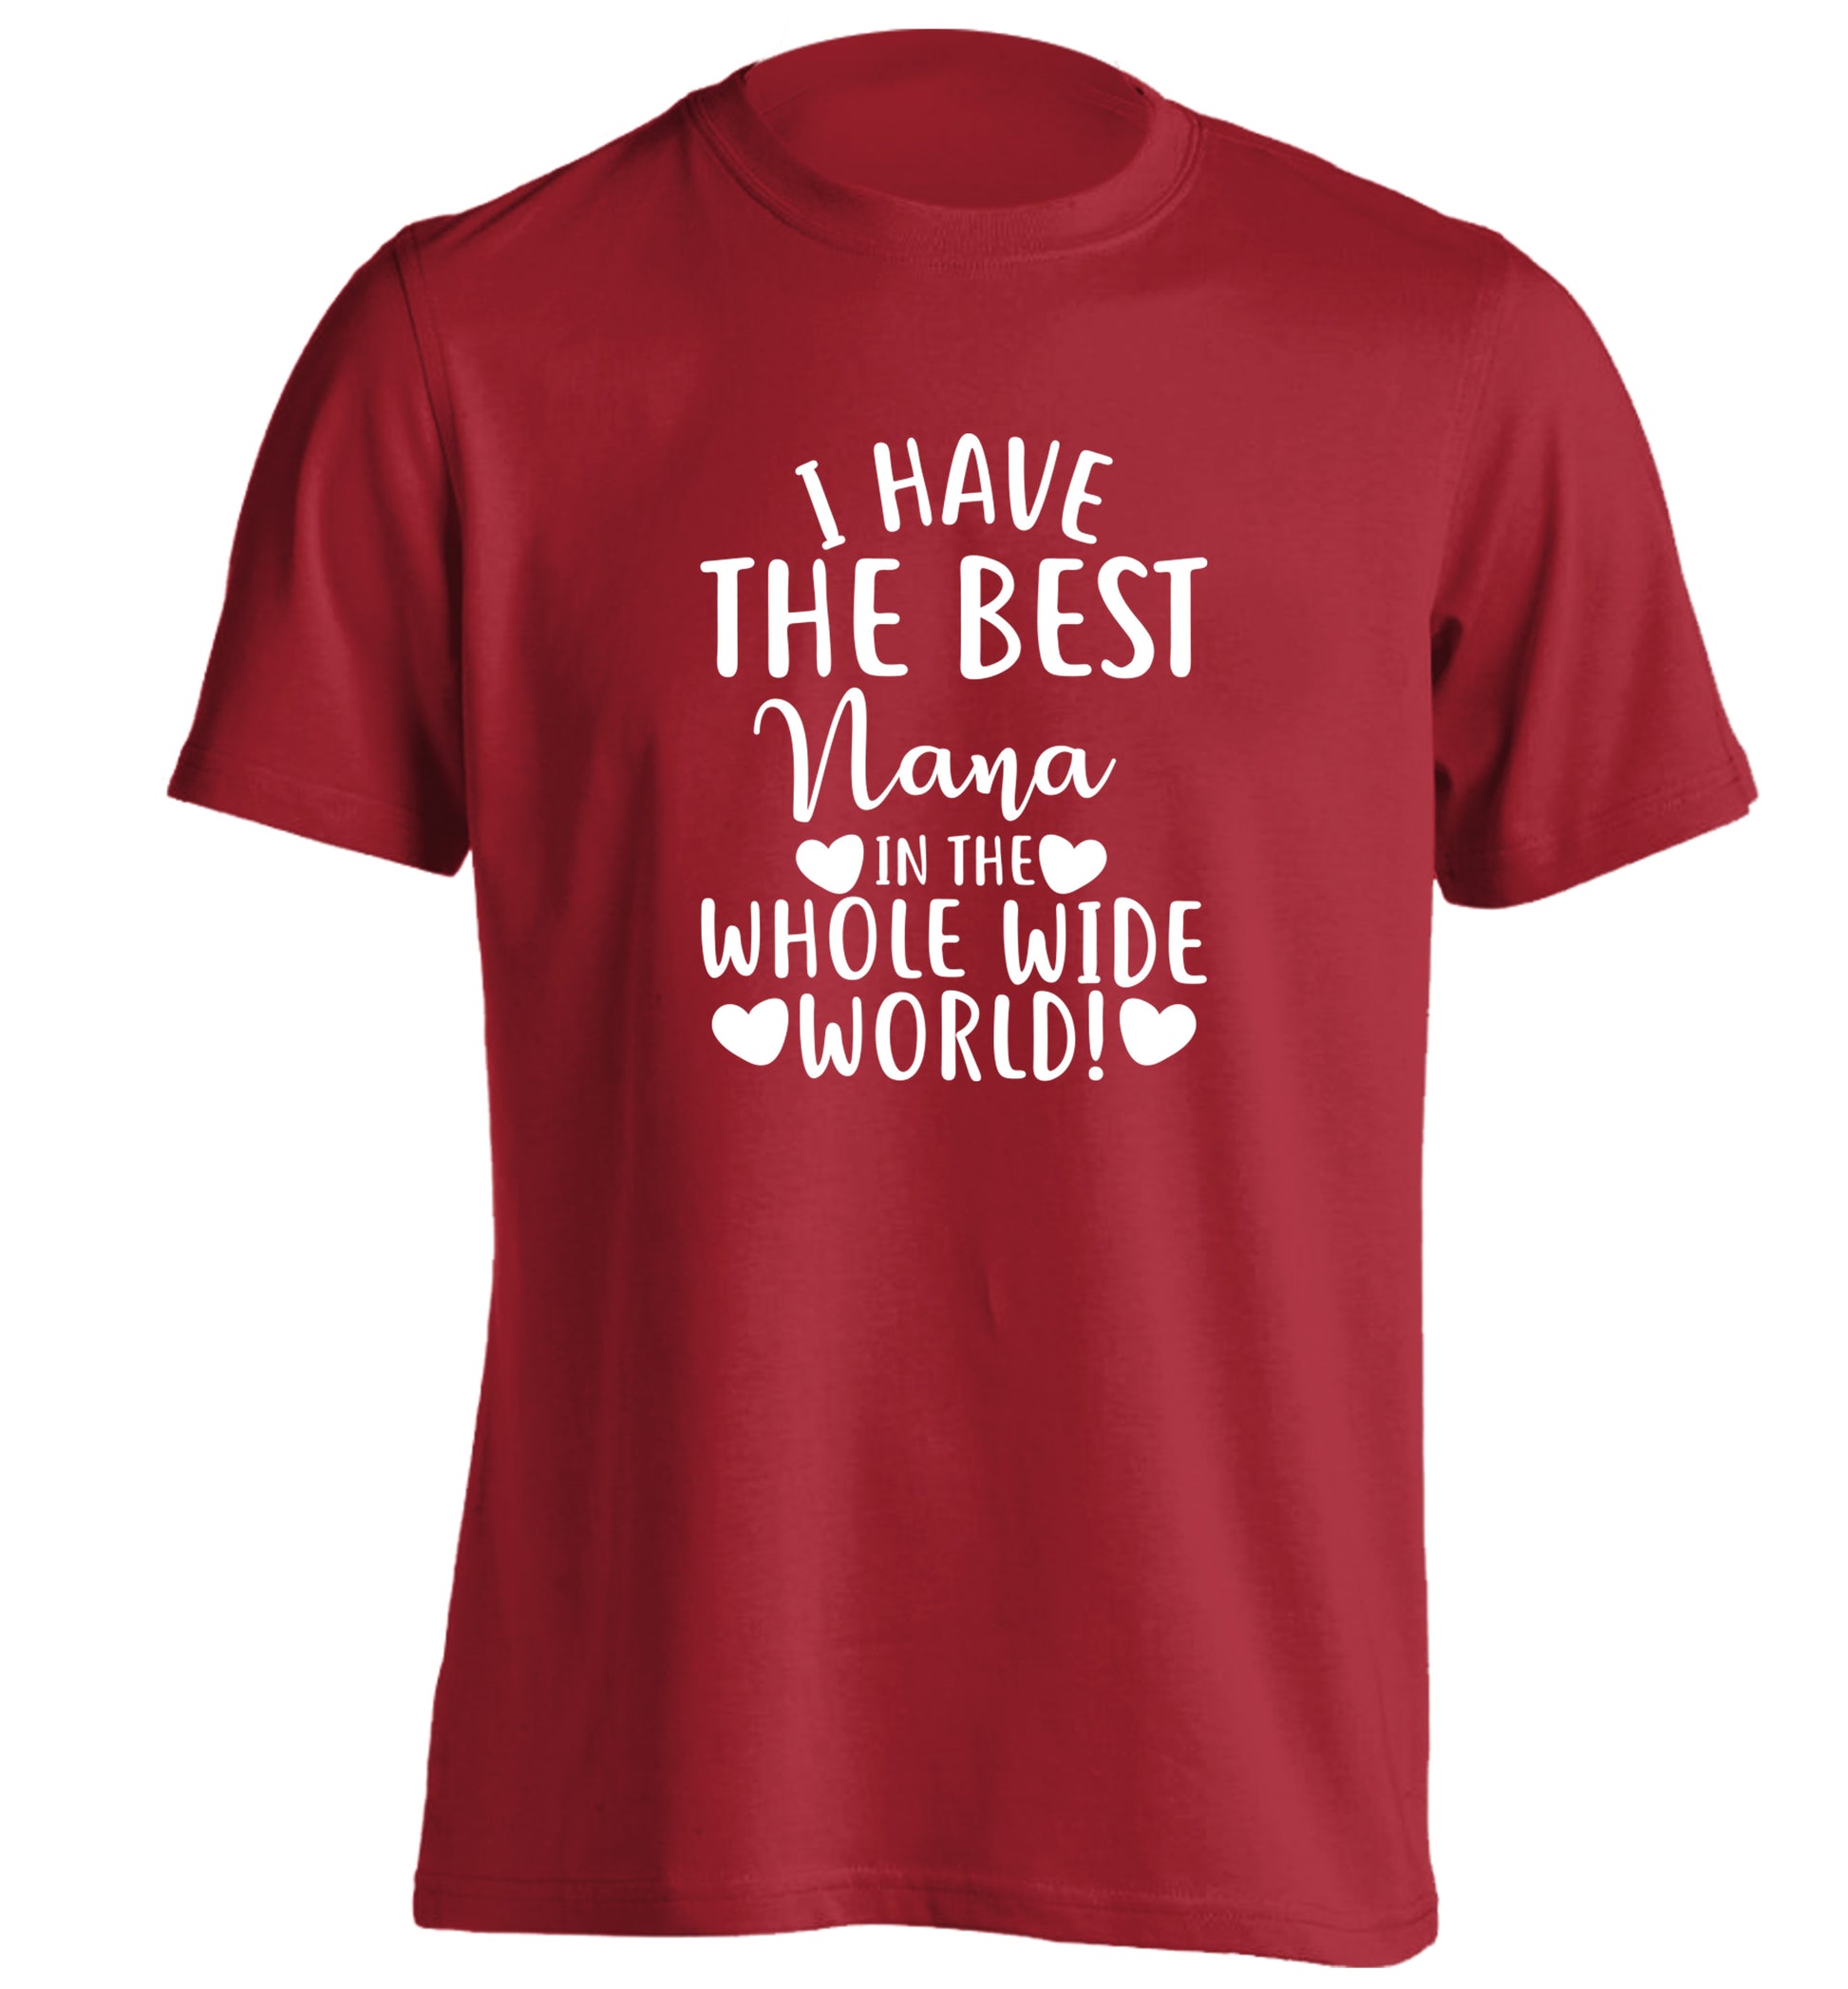 I have the best nana in the whole wide world! adults unisex red Tshirt 2XL